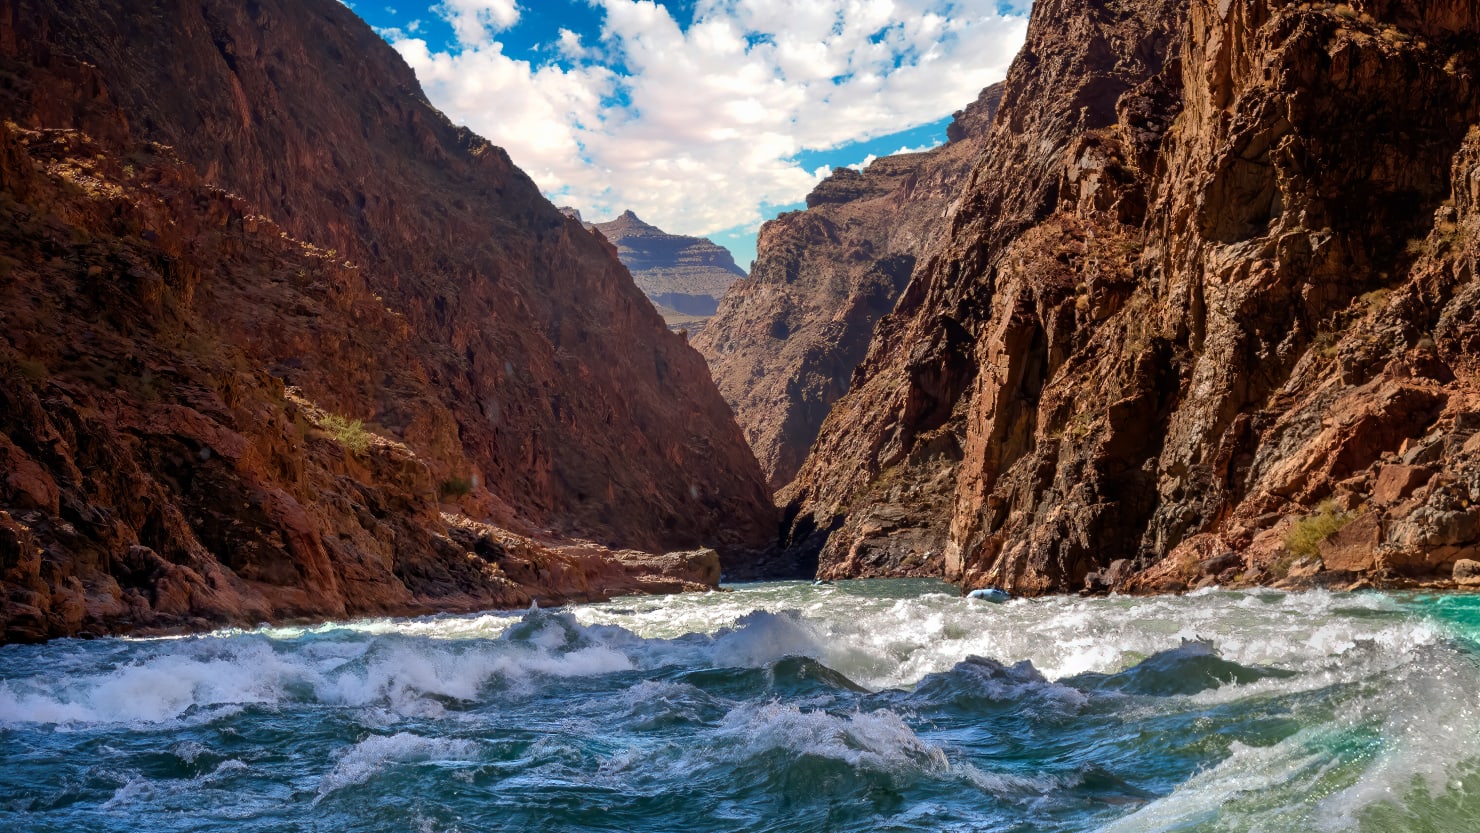 Grand Canyon Motorboat Accident Leaves 1 Dead